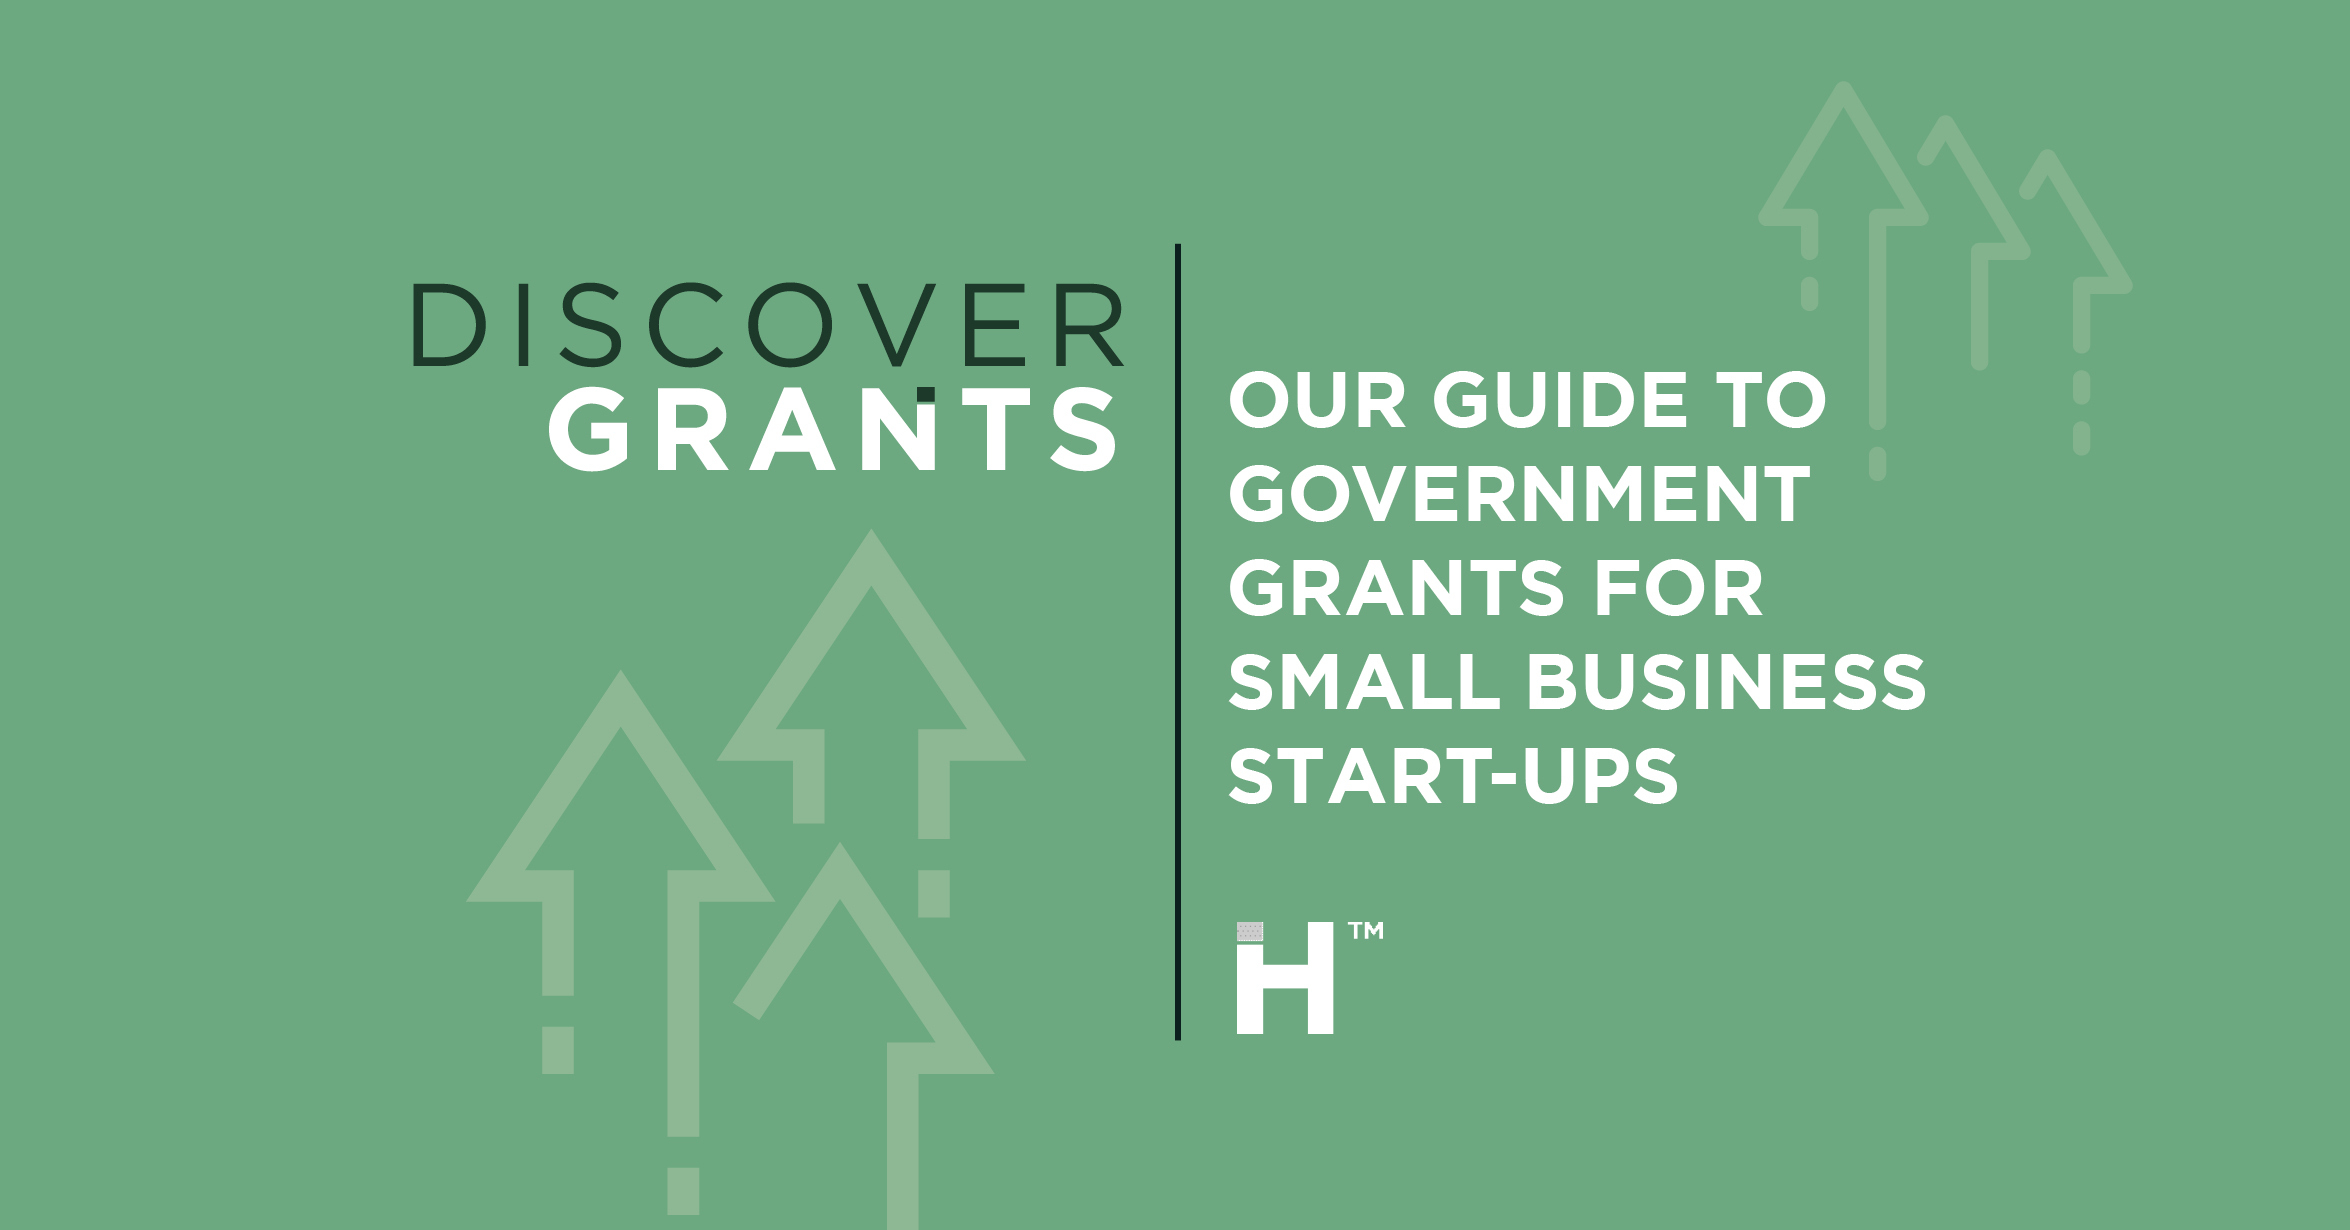 Government grants for small business start-ups